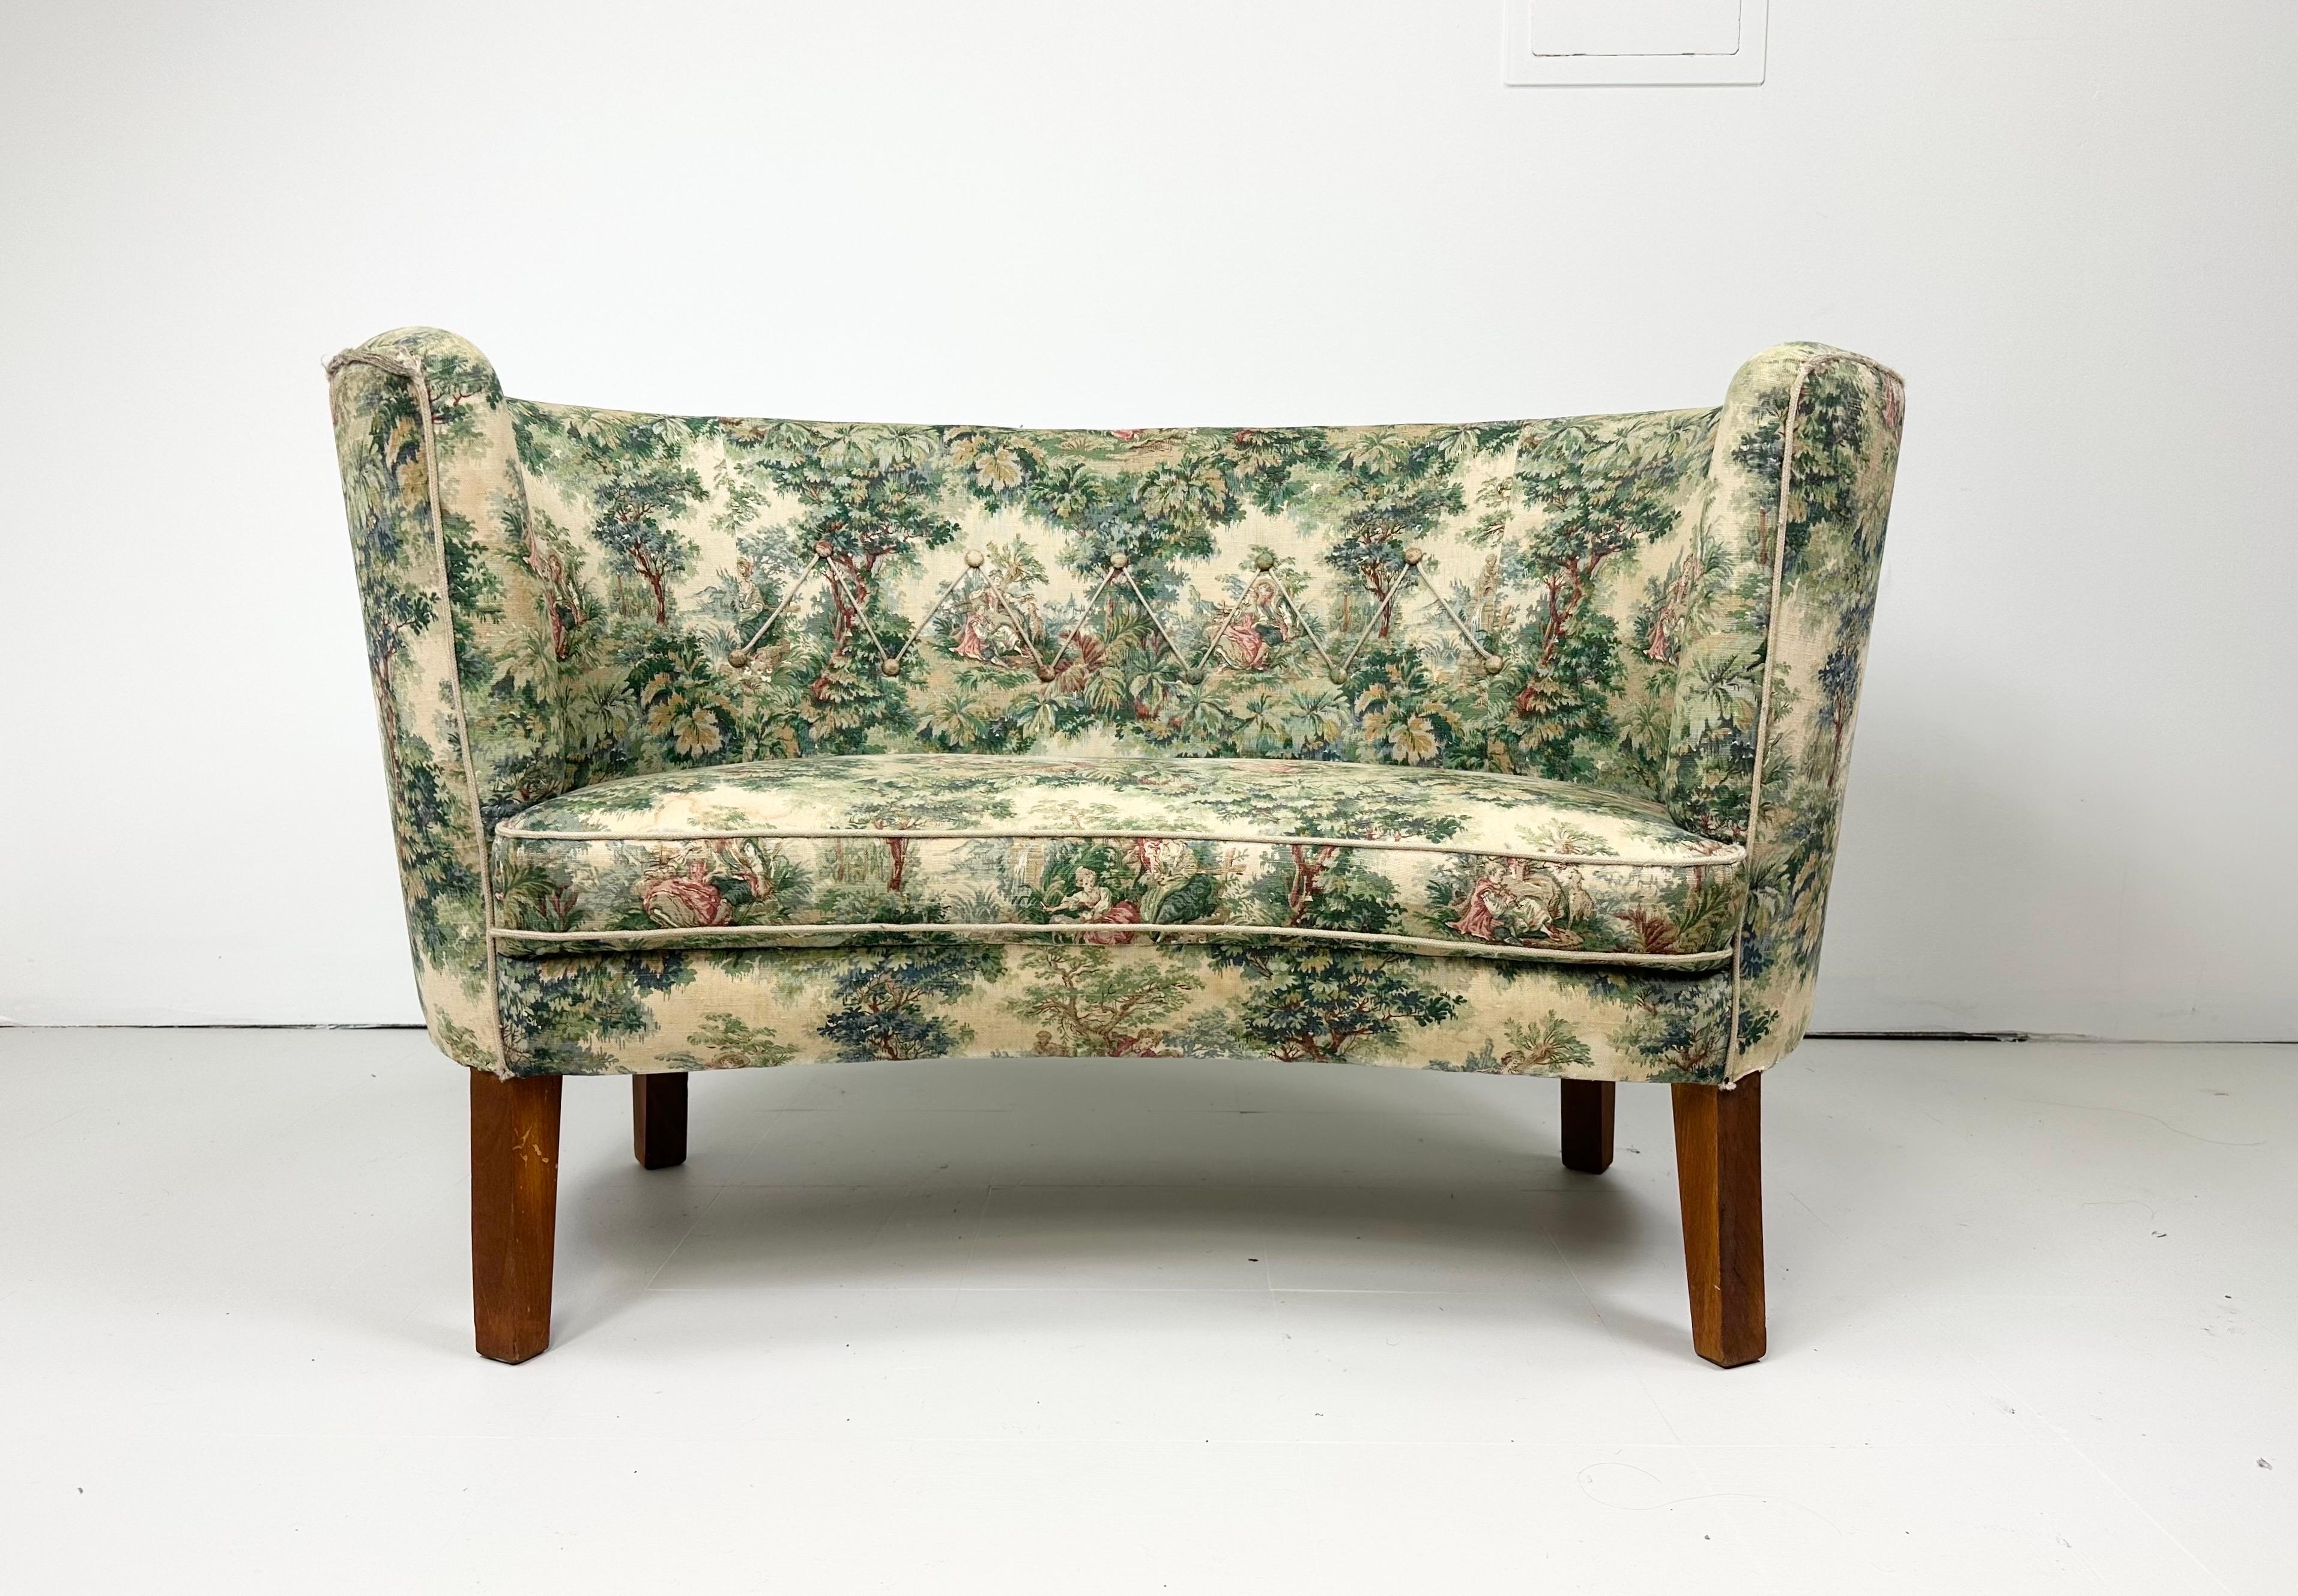 Petit 1940's Danish Upholstered Bench with wood legs. Bench is slightly curved and in the style of larger classic Danish sofas of the same period. Original upholstery. 

We can assist with delivery to NYC. Please inquire.